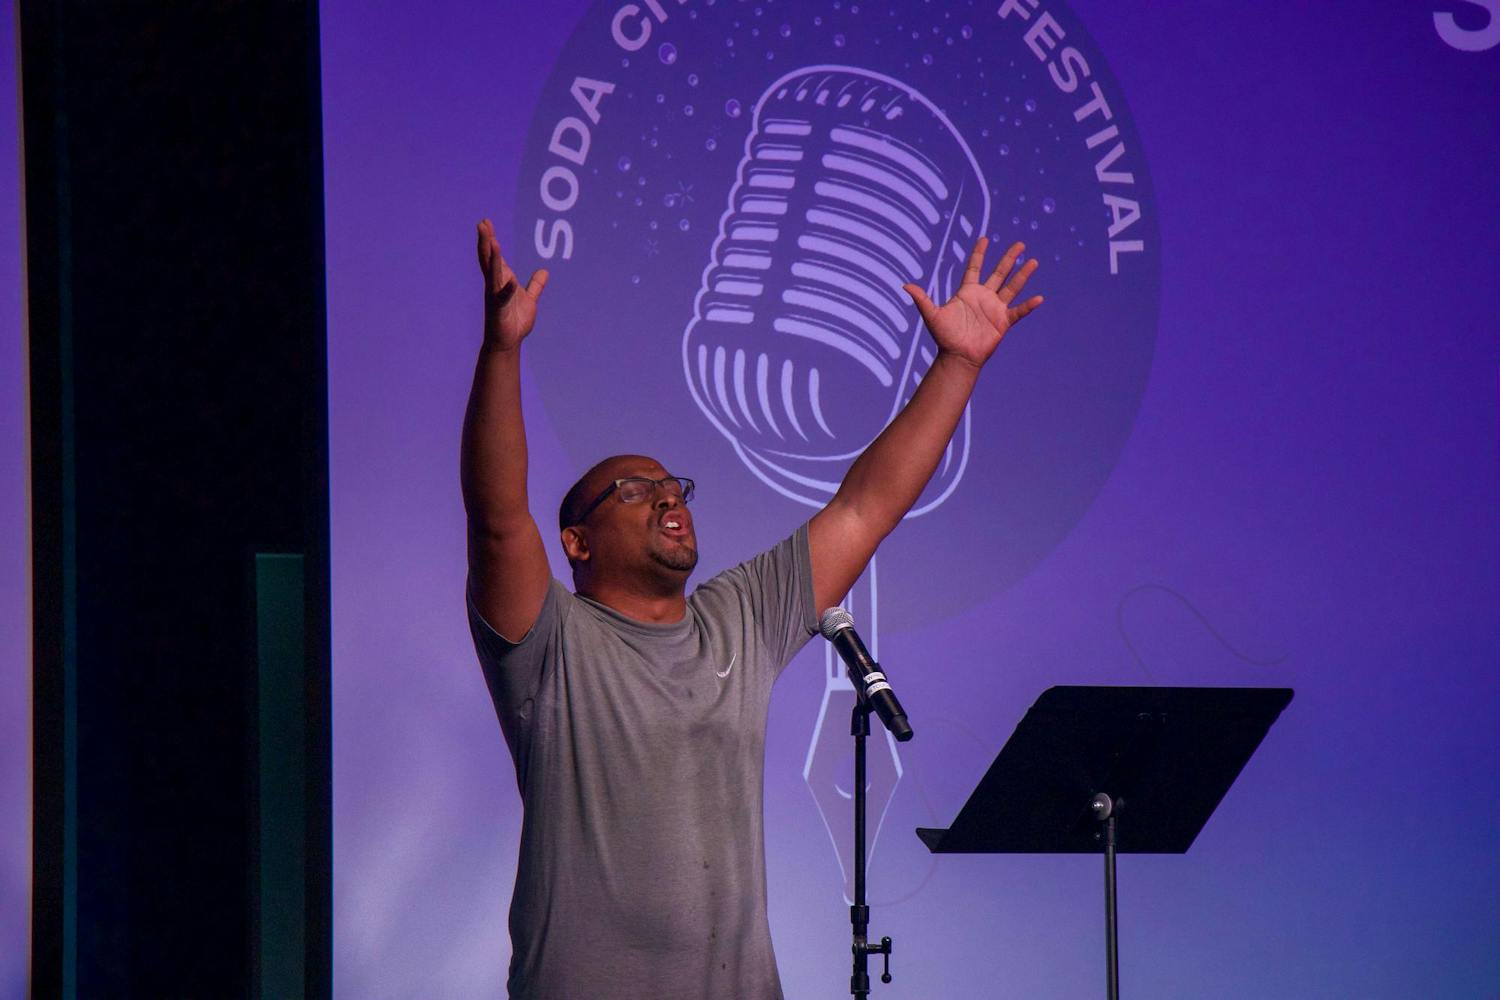 Lester “Blless” Boykin delivers an emotional and heartfelt reading of an original poem during the open mic session of the inaugural Soda City Poetry Festival on June 22, 2024. The festival aimed to promote and celebrate local and regional poets and artists.